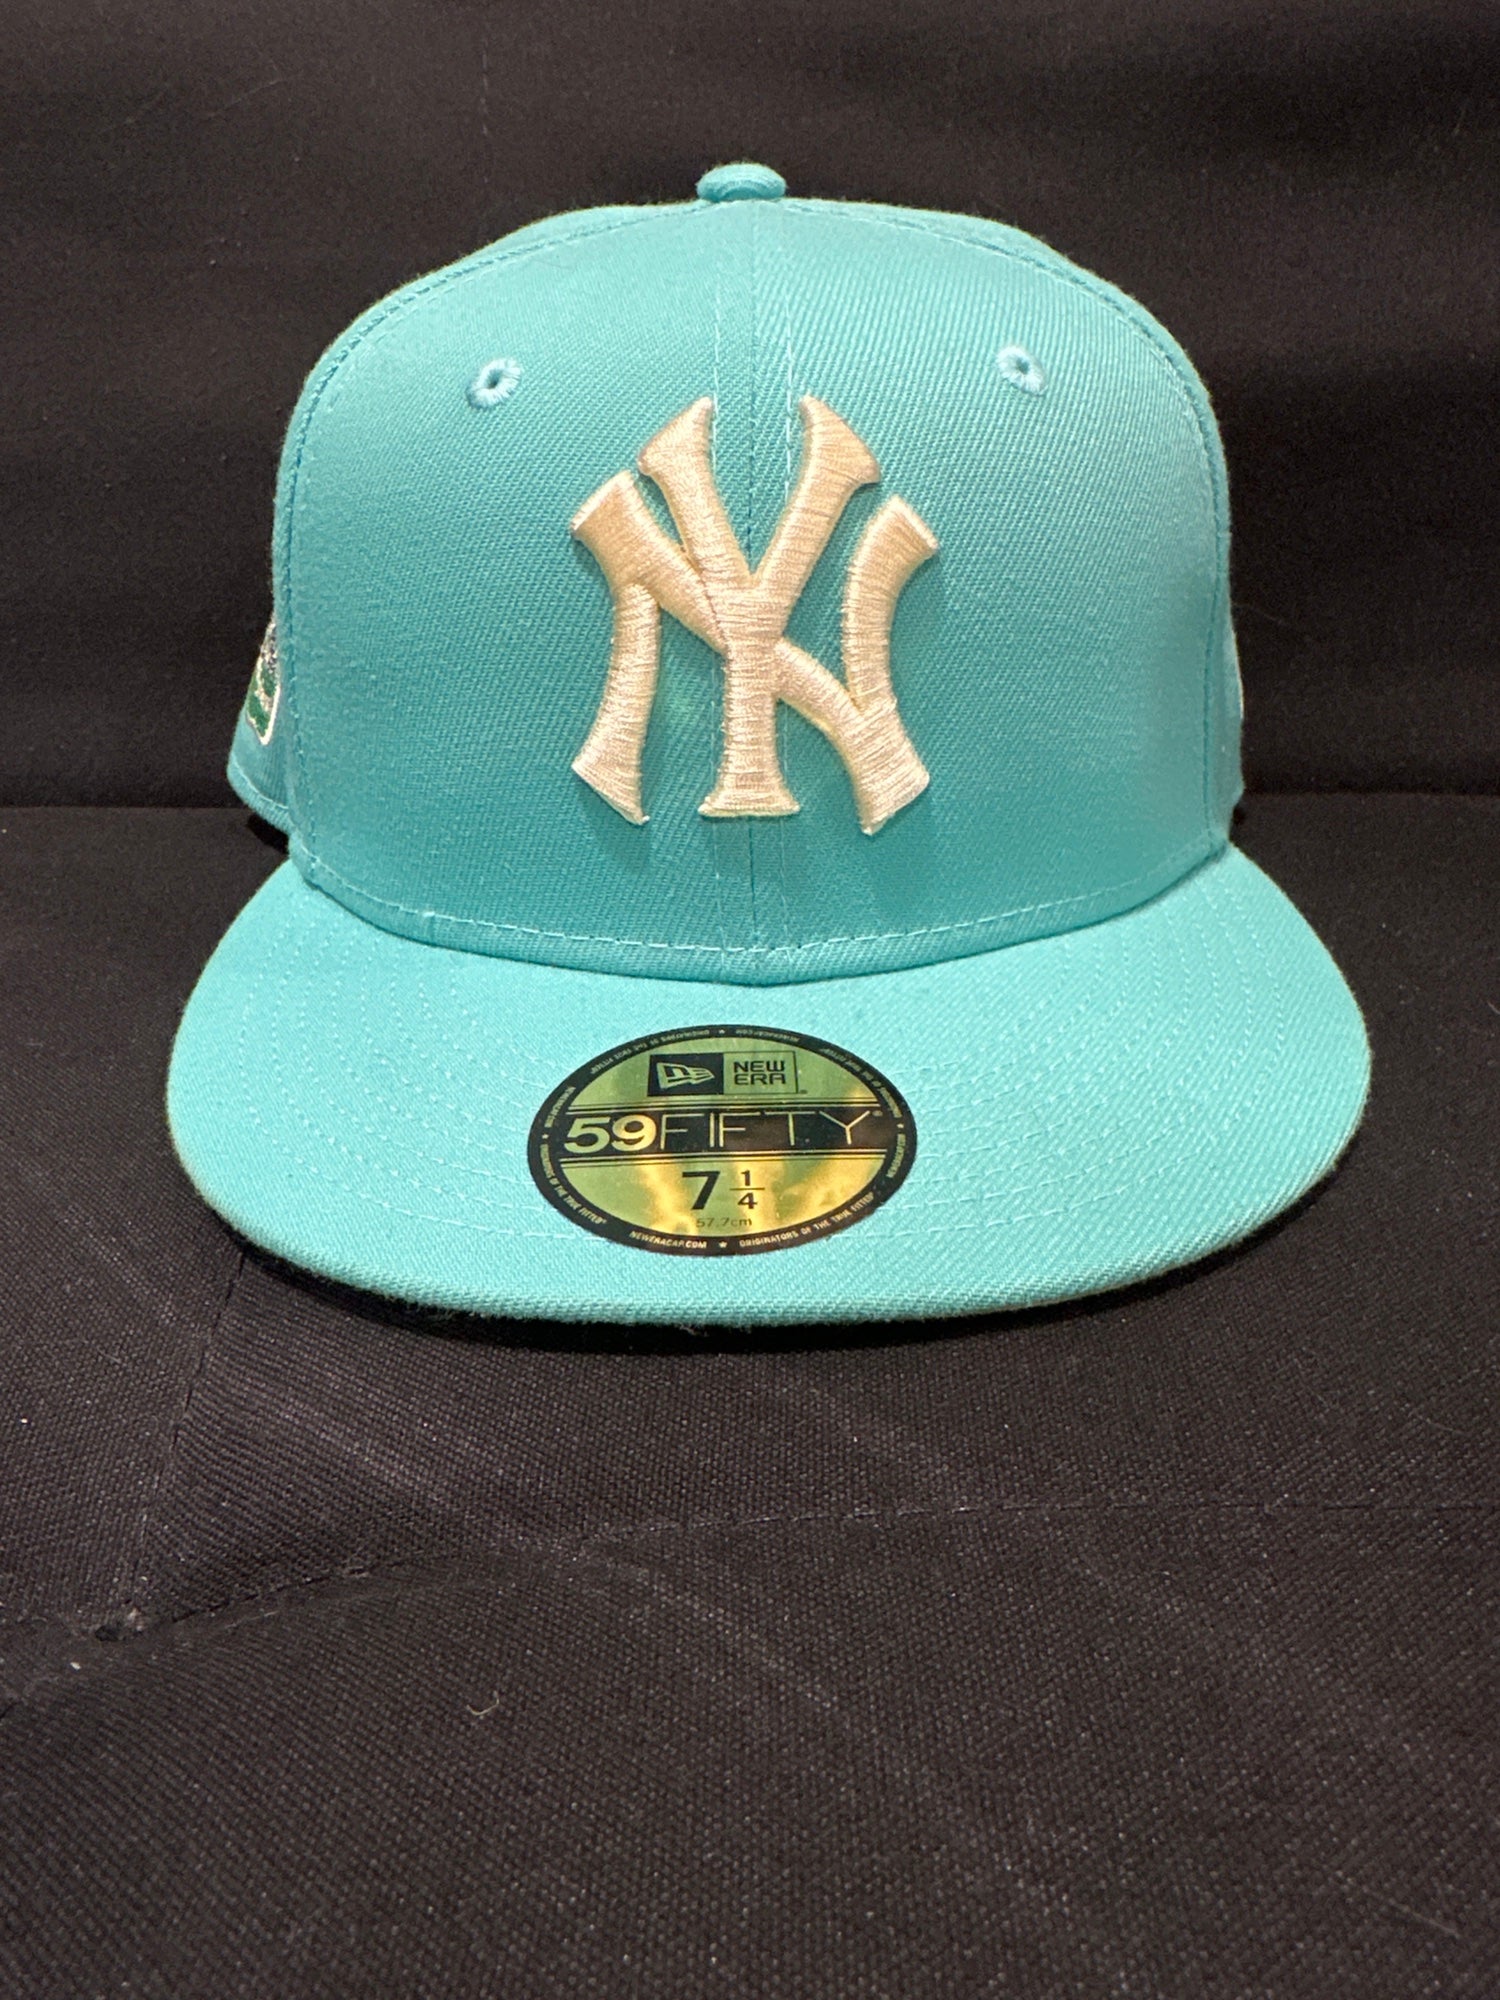 New 7 1/4 Yankees Fitted | SidelineSwap